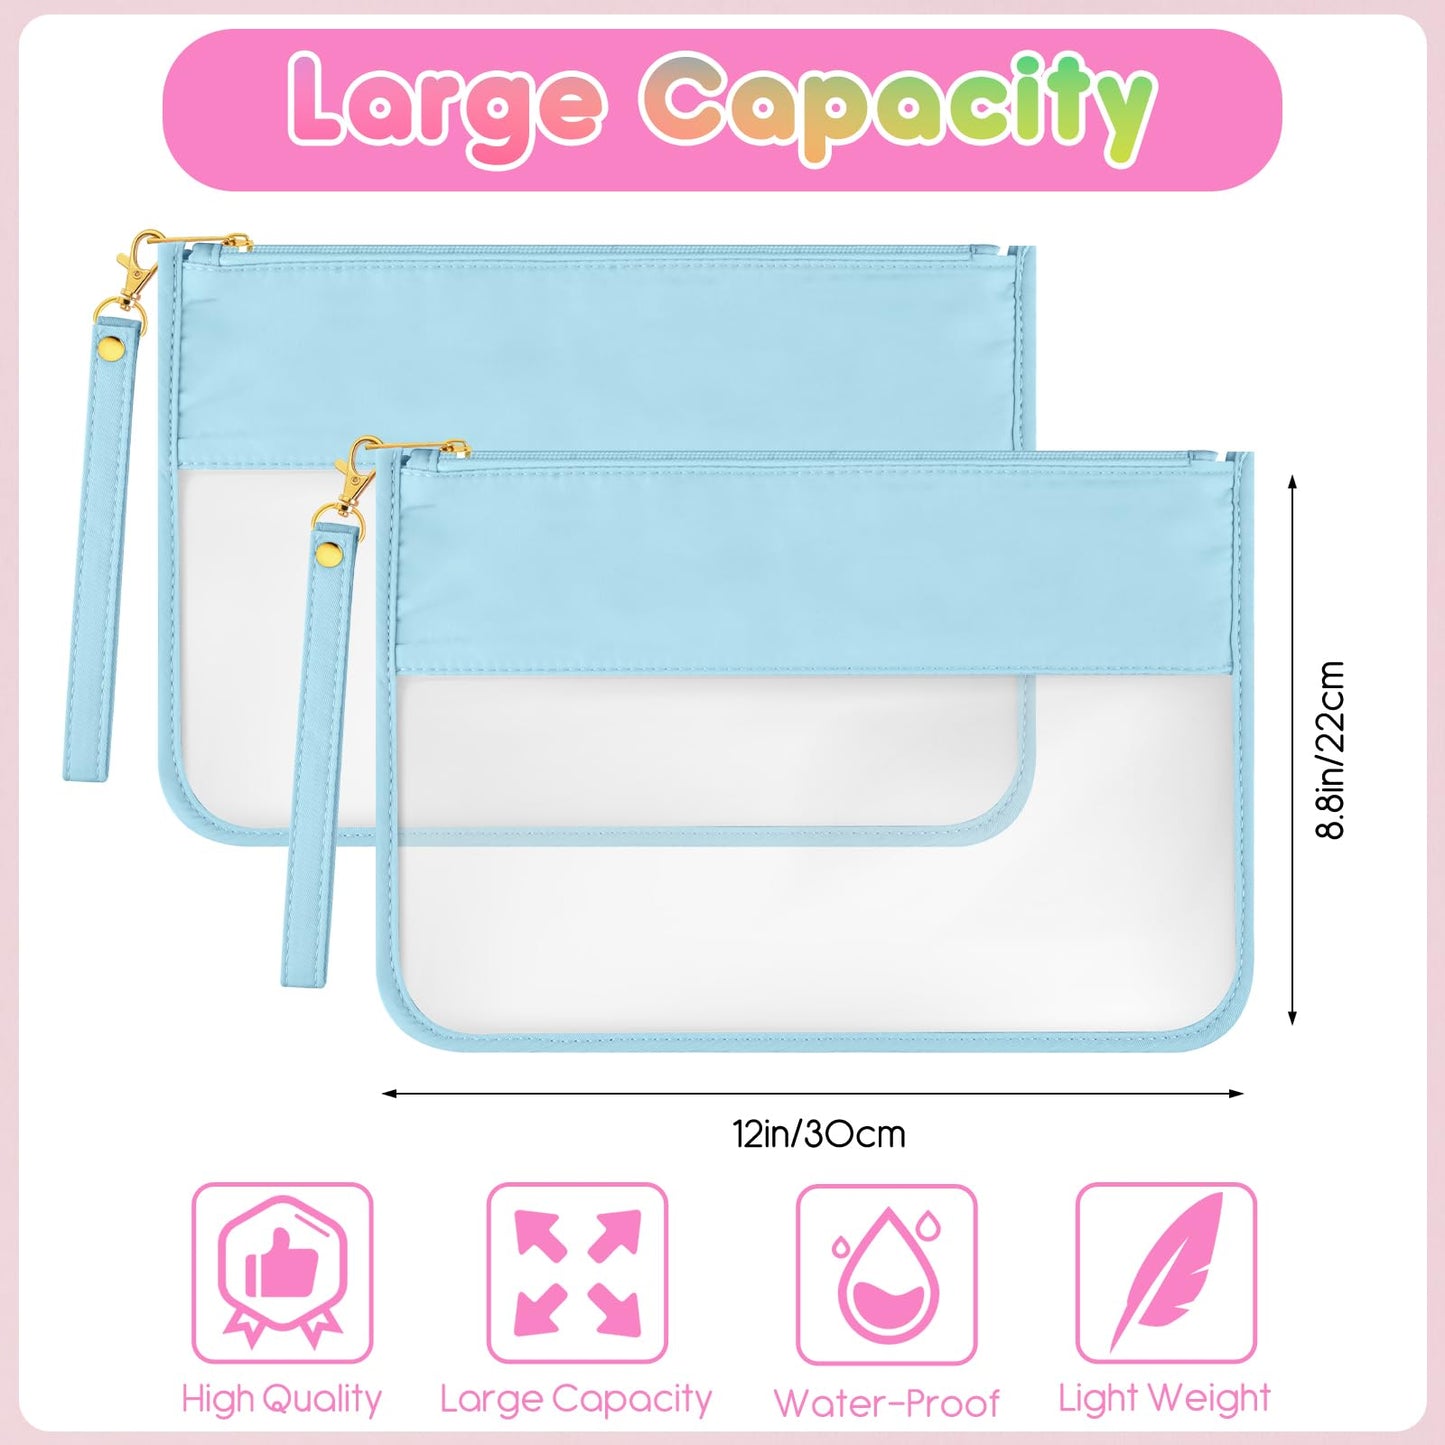 Morcheiong 2 Pieces DIY Chenille Letter Bag Nylon Clear Zipper Pouch with Wristlet Clear Travel Makeup Bag Cosmetic Pouch Toiletry Bag for Women Girls (Light Blue)